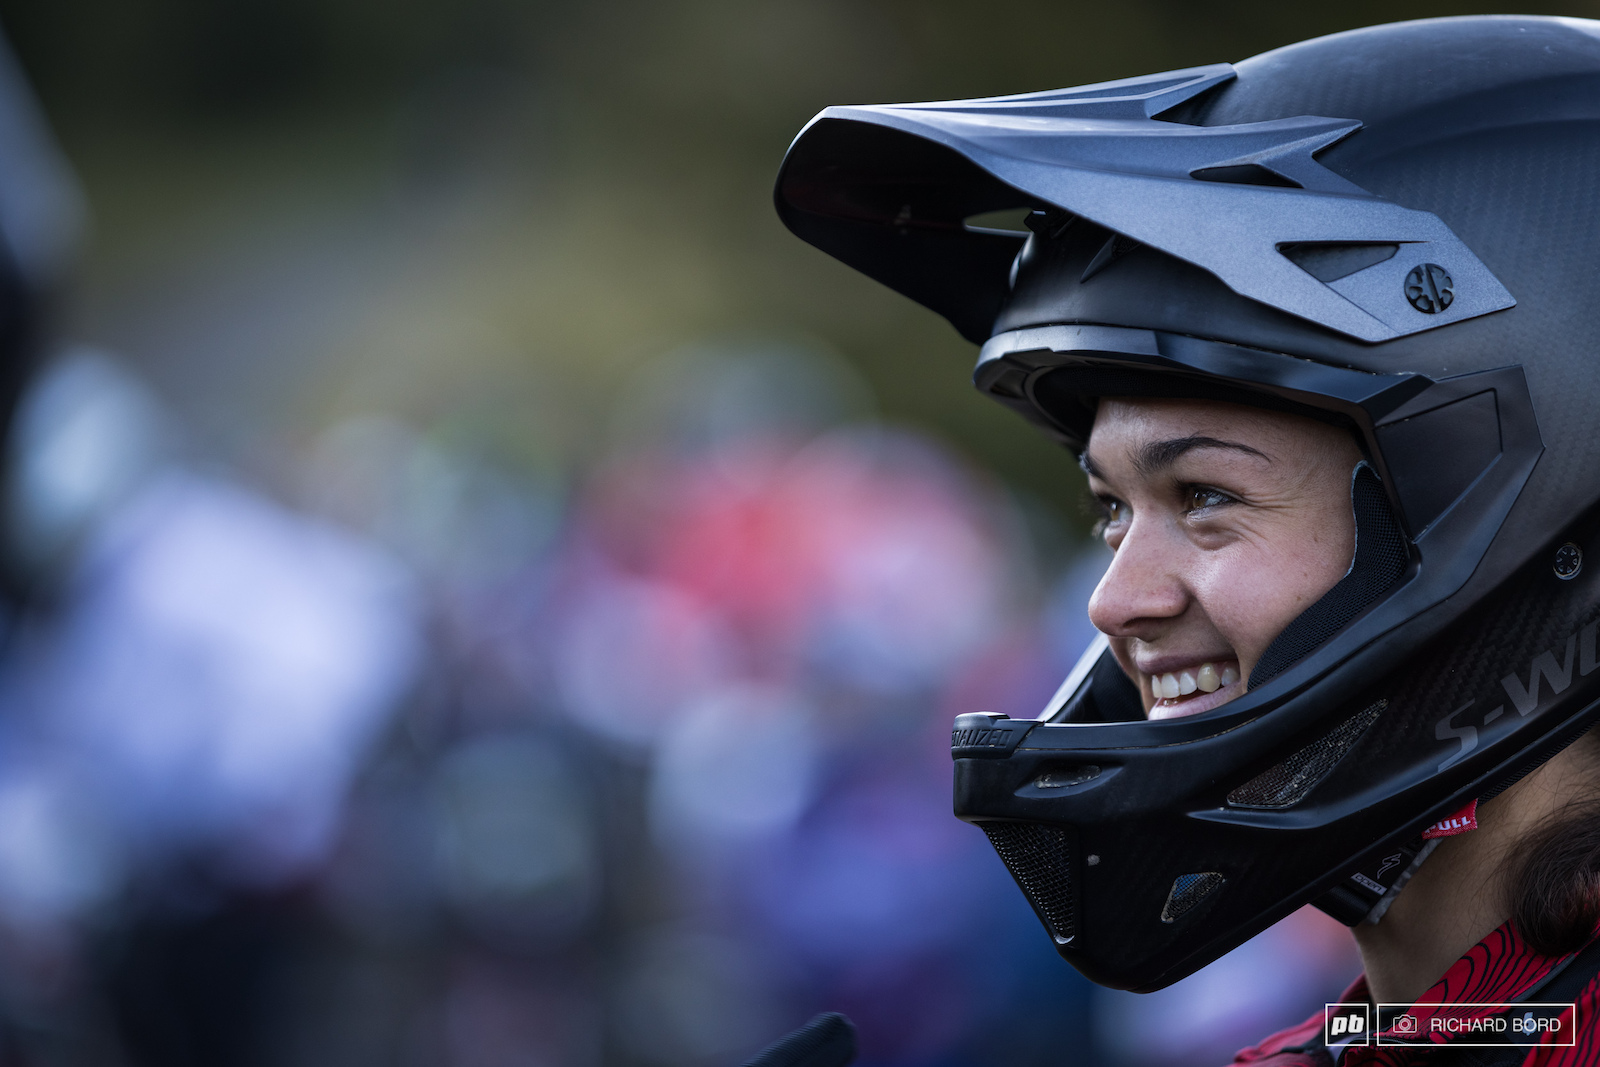 Axelle Murigneux's big smile on Saturday  morning.